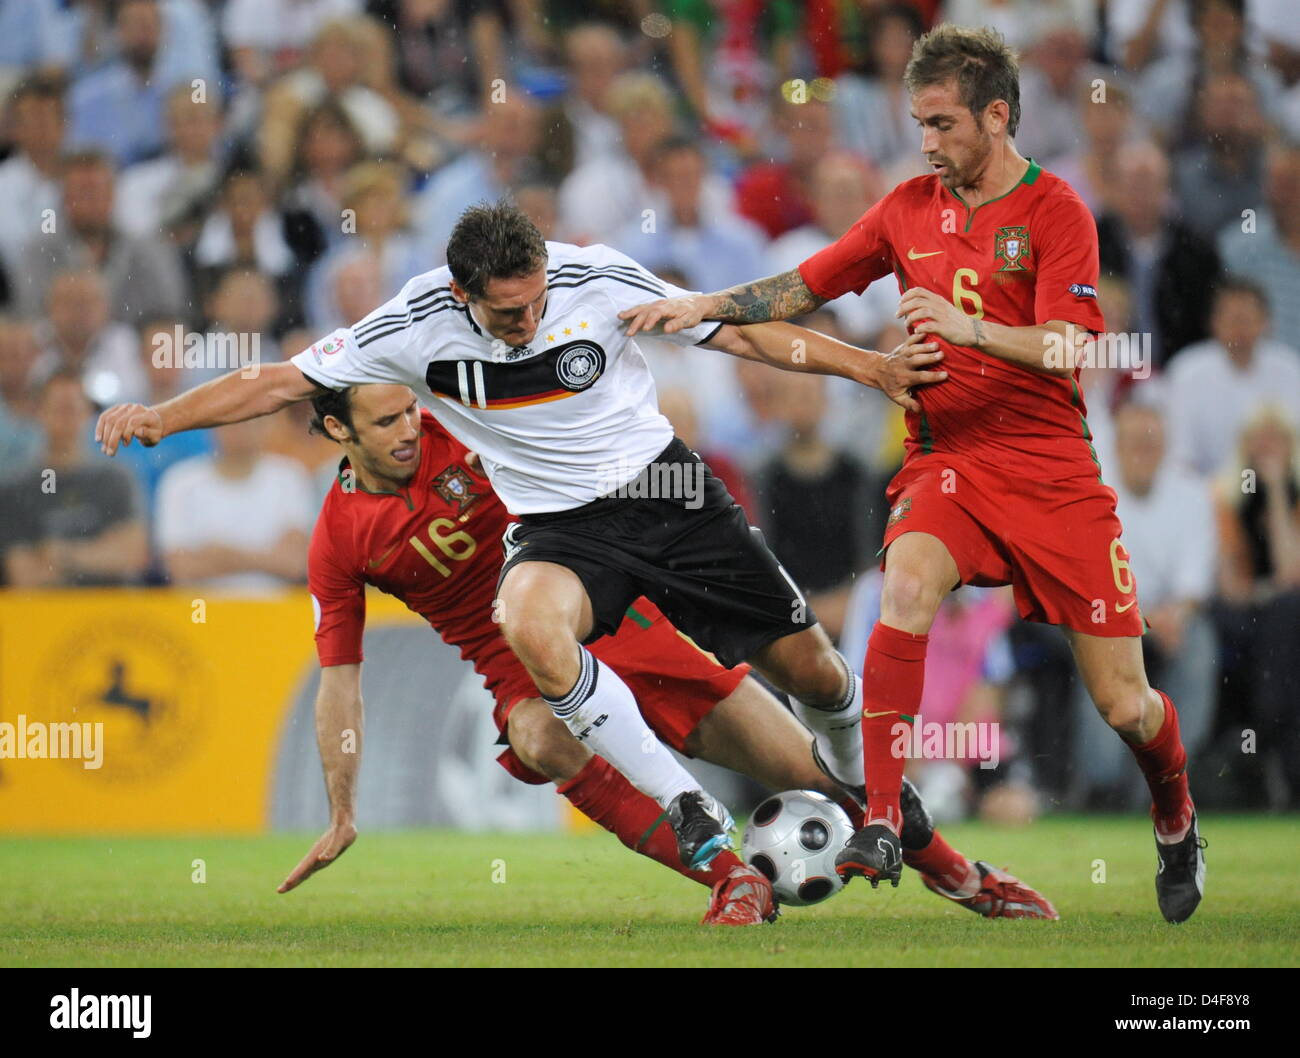 Ricardo Carvalho (L) and Raul Meireles (R) of Portugal fight for the ball with Miroslav Klose (C) of Germany during the UEFA EURO 2008 quarter final match between Portugal and Germany at the St. Jakob-Park stadium in Basel, Switzerland 19 June 2008. Photo: Peter Kneffel dpa +please note UEFA restrictions particulary in regard to slide shows and 'No Mobile Services'+ +++(c) dpa - Bi Stock Photo